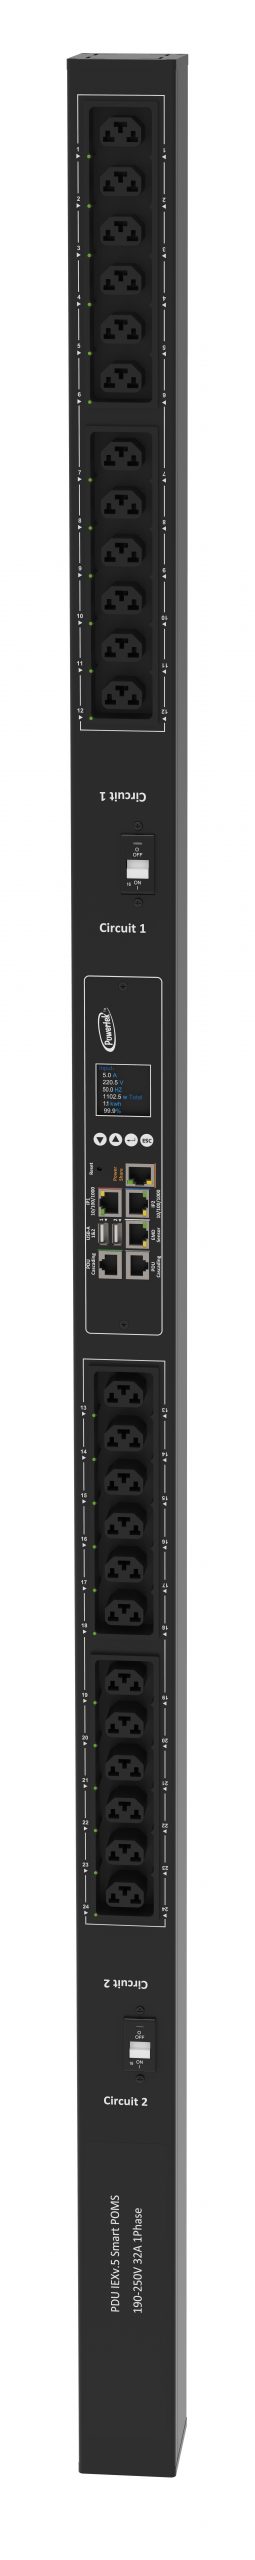 IPDU Per Outlet Switched Metered Intelligent Power Distribution with remote internet access for  information per inlet and remote switching per outlet.